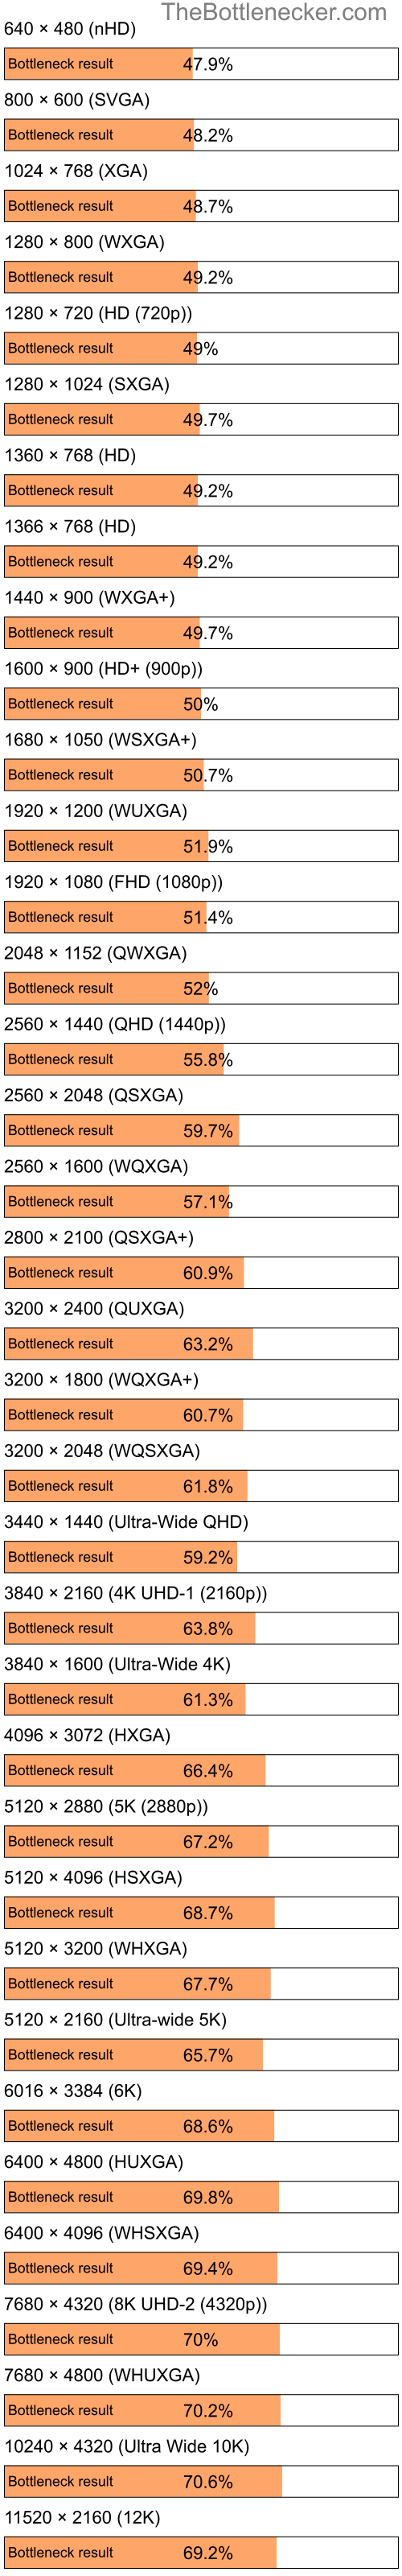 Bottleneck results by resolution for Intel Celeron and AMD Mobility Radeon X1700 in Processor Intense Tasks